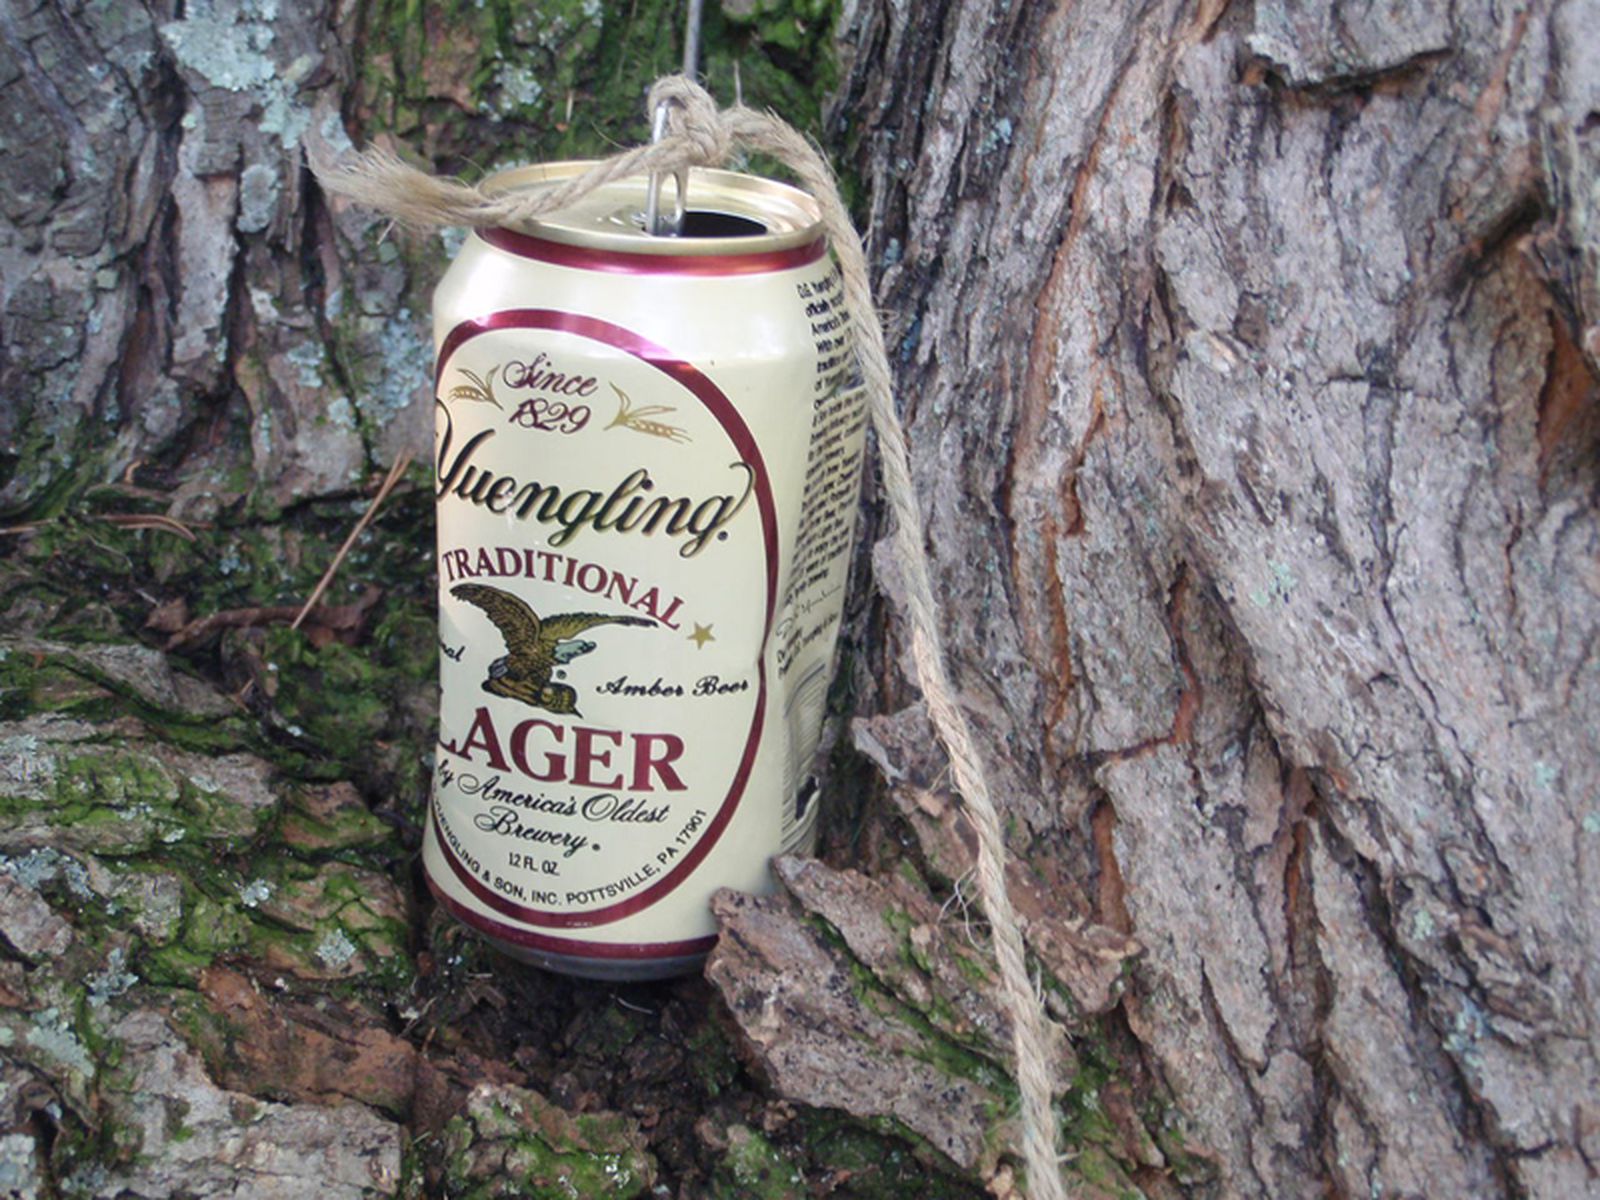 A can filled with rocks tied to a string, hanging from a tree.